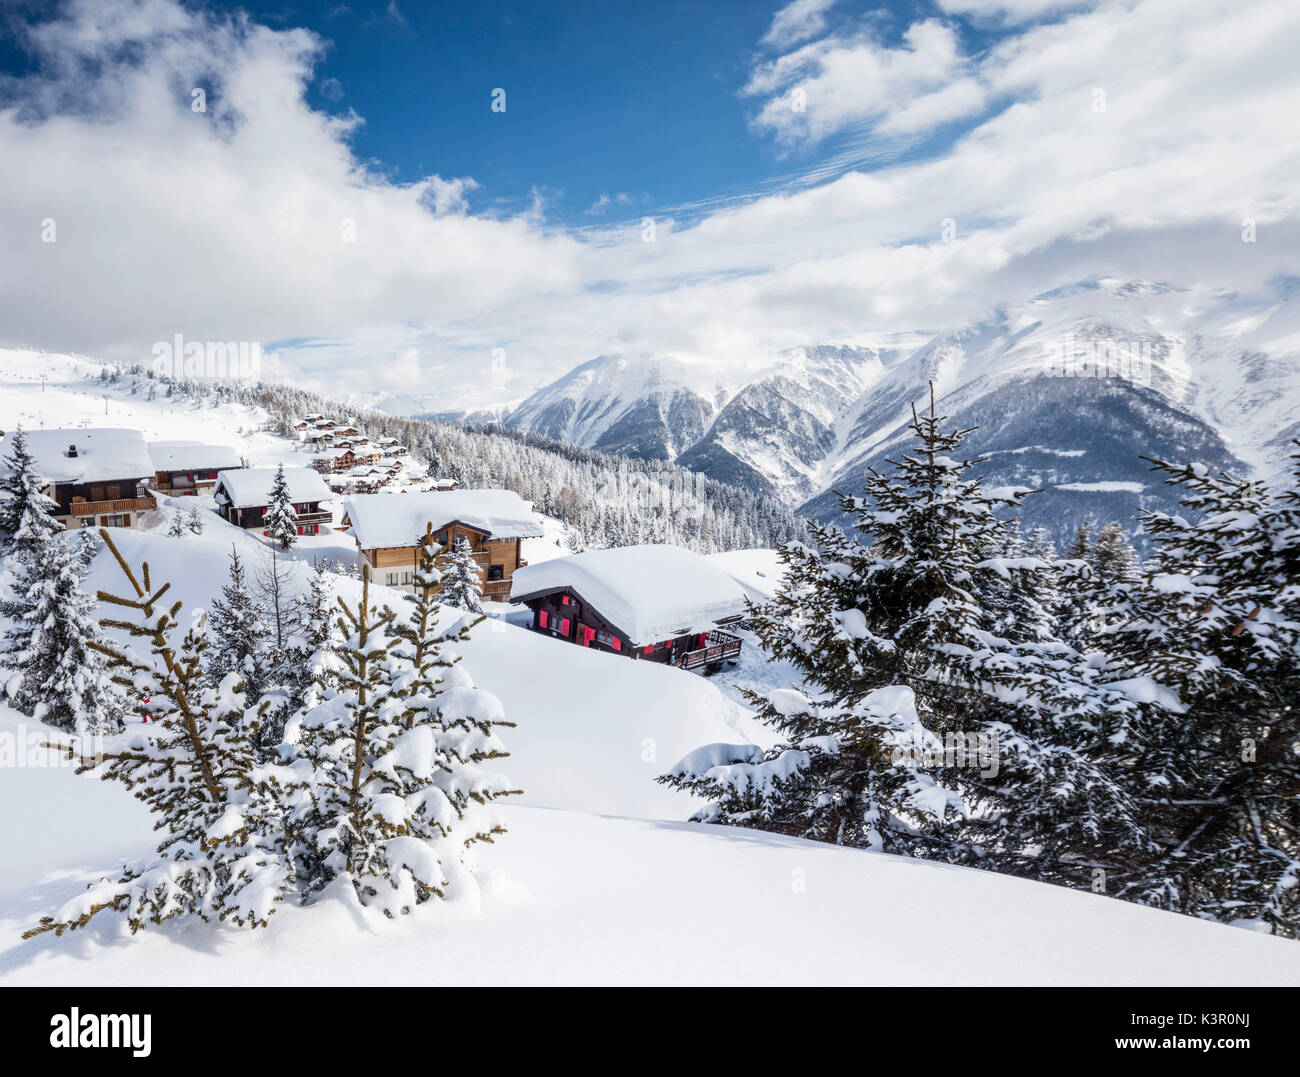 Panorama of the alpine village surrounded by snow and woods Bettmeralp district of Raron canton of Valais Switzerland Europe Stock Photo